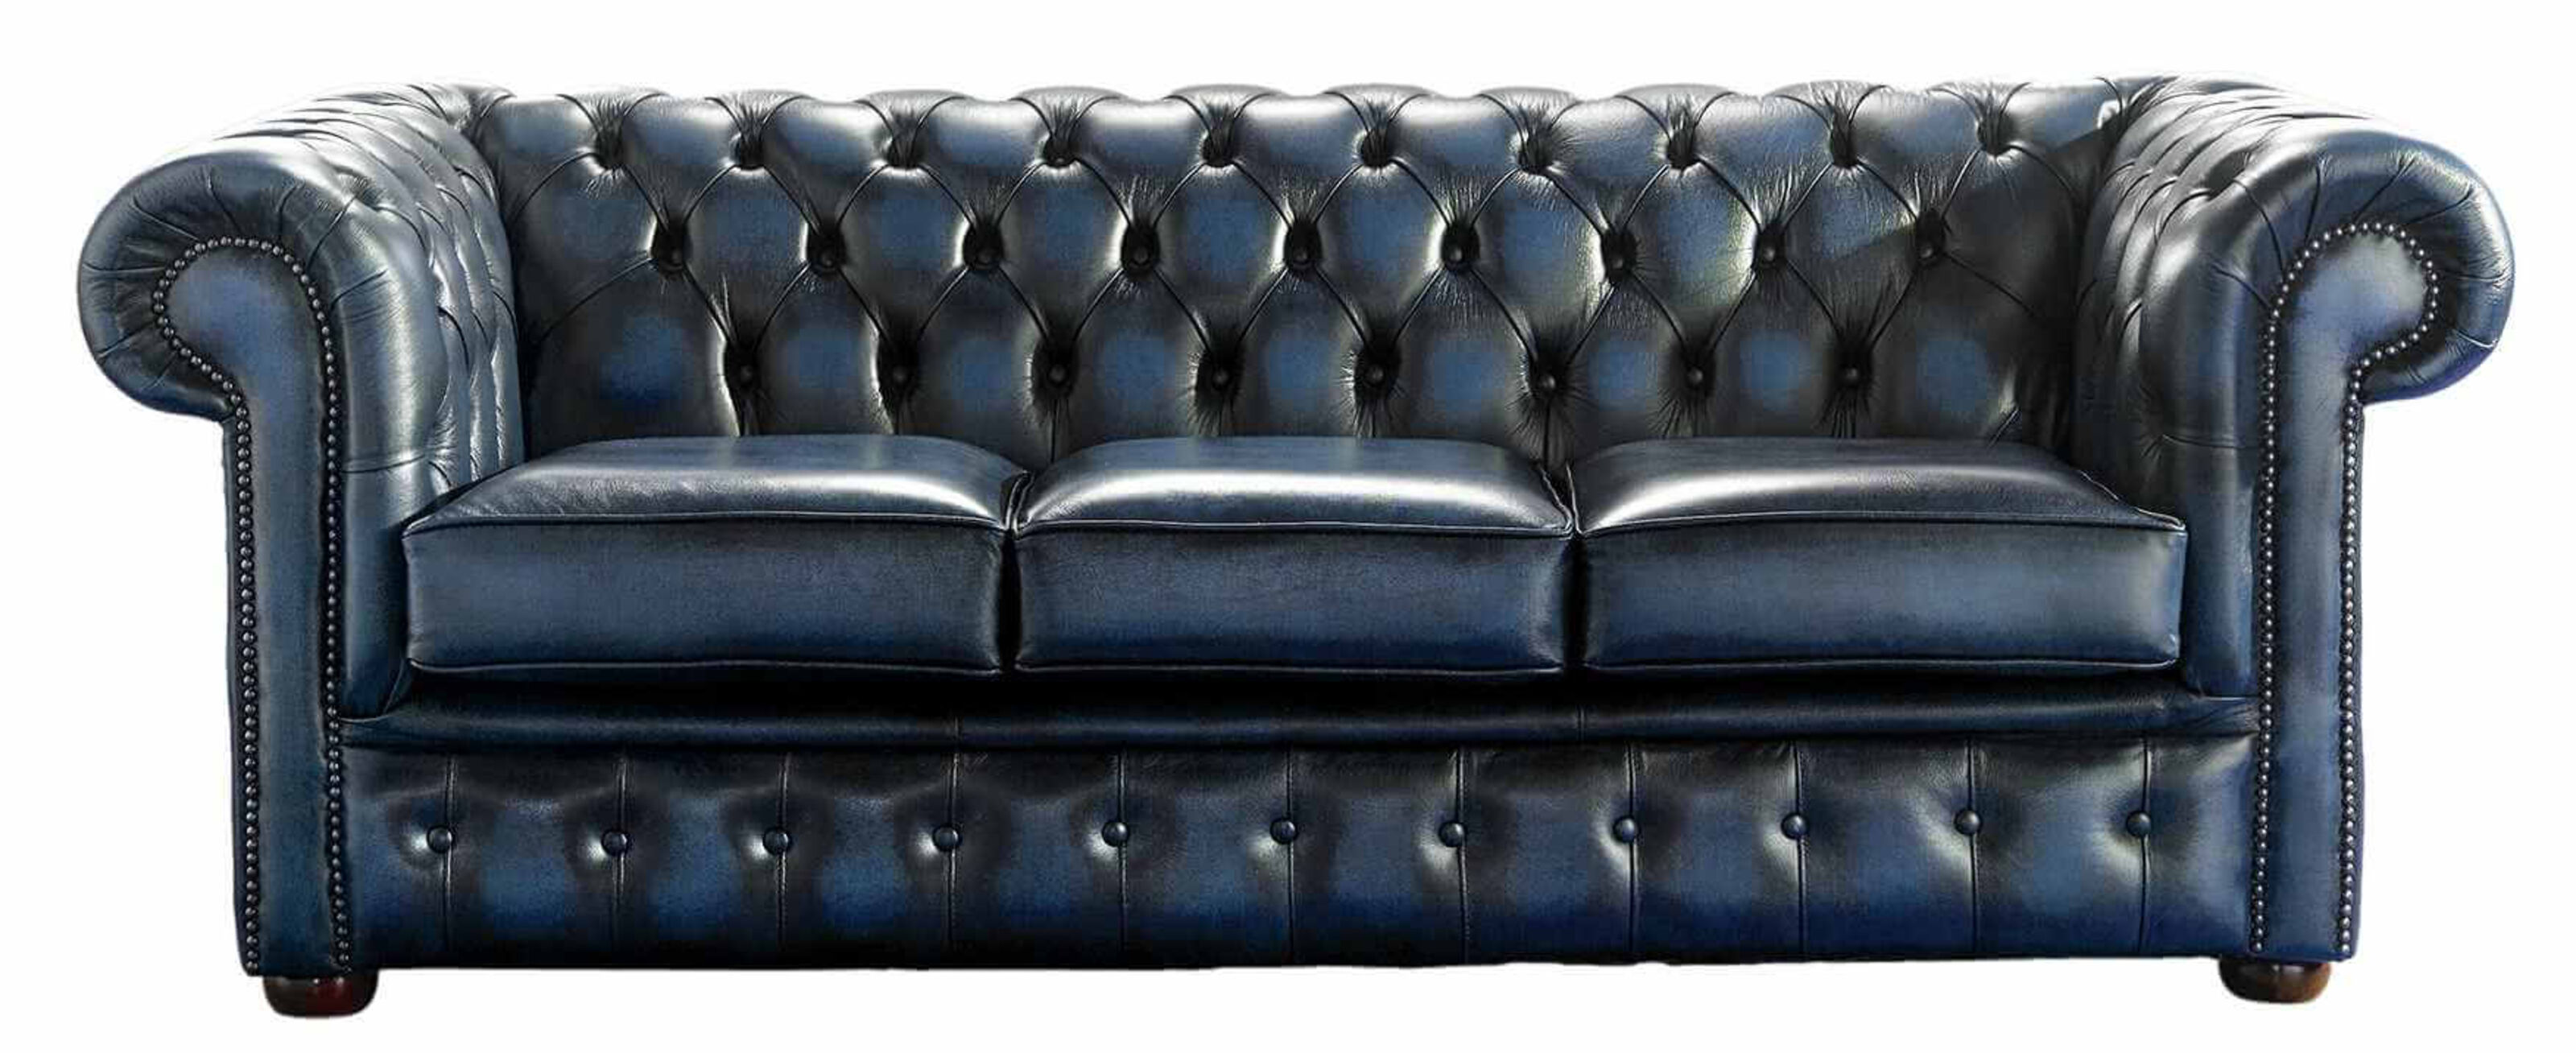 Modern or Classic: Choosing Your Dream Chesterfield Sofa  %Post Title